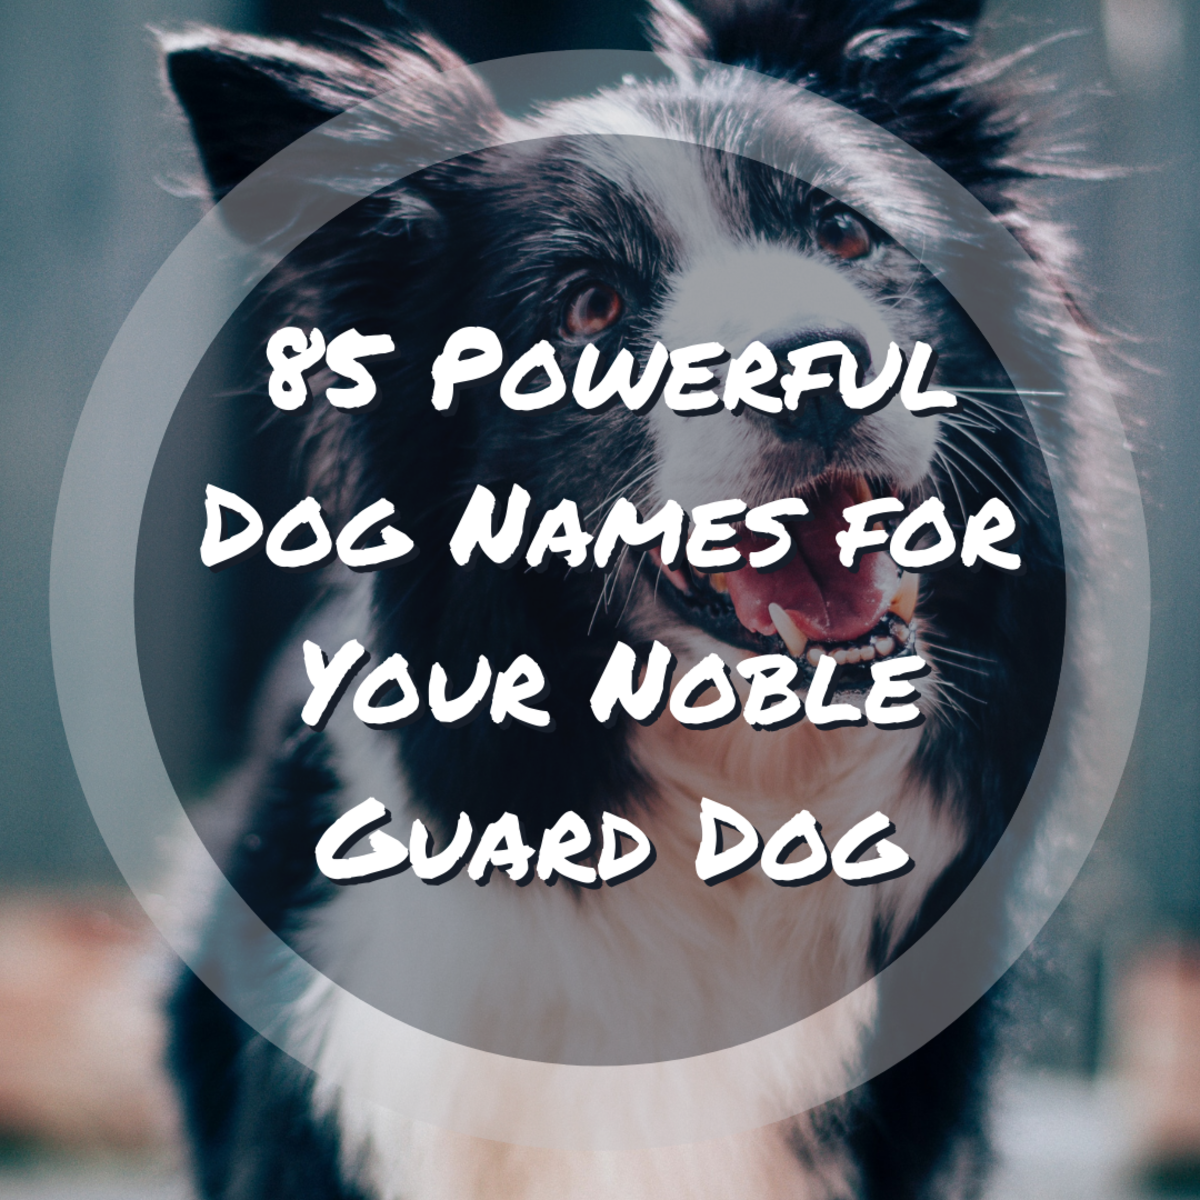 95 Powerful Dog Names for Your Loyal, Noble Guard Dog - PetHelpful